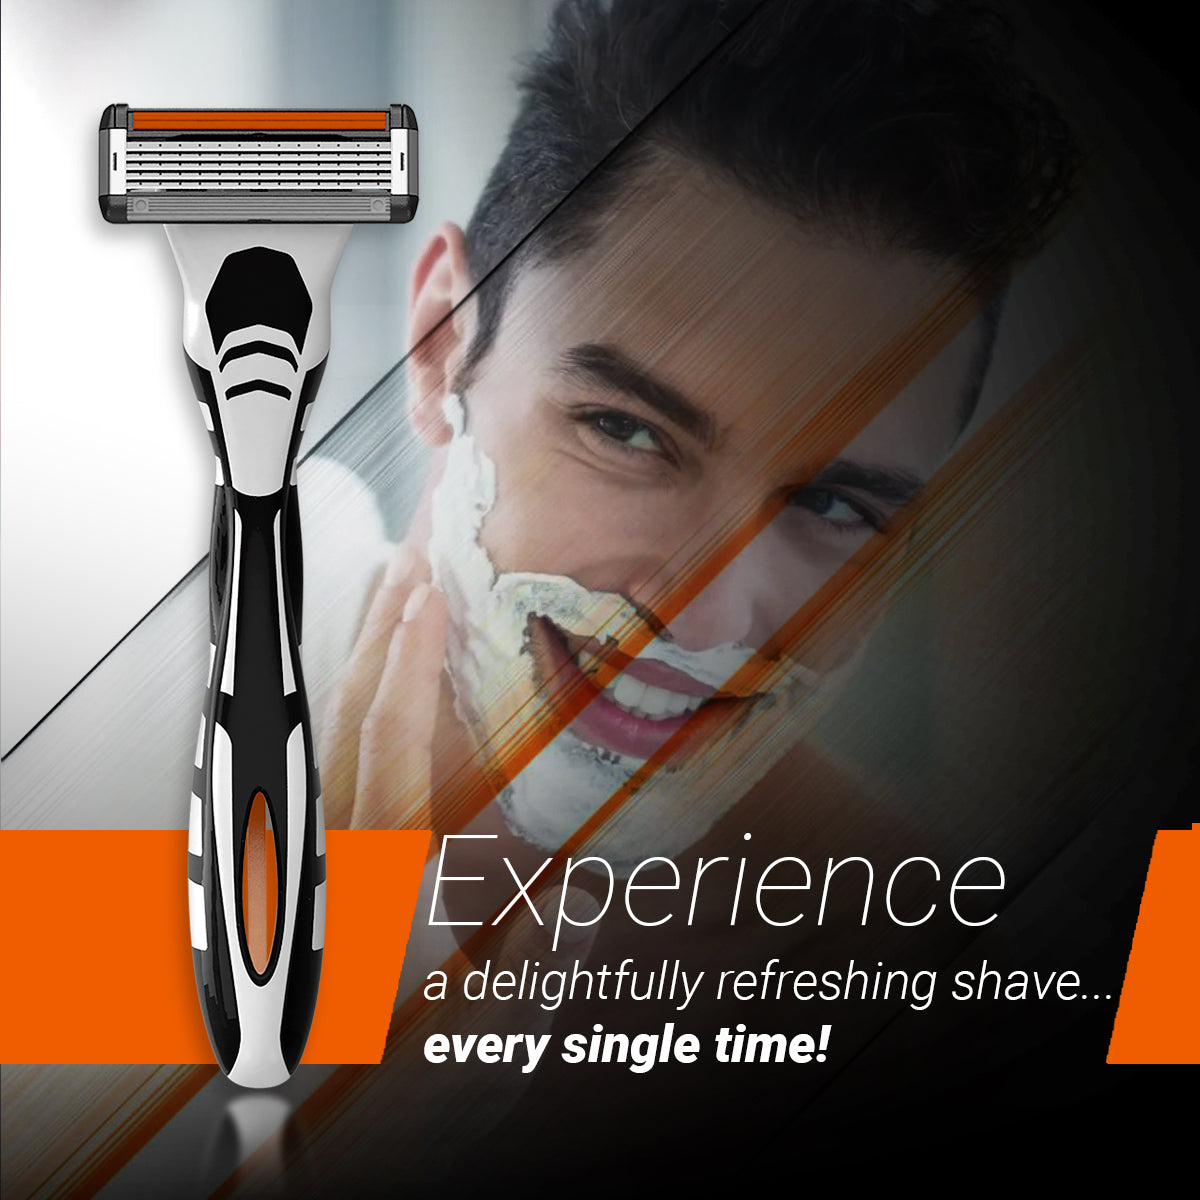 Zlade HyperGlide5 Pro Razor for Men – Powered by Bic